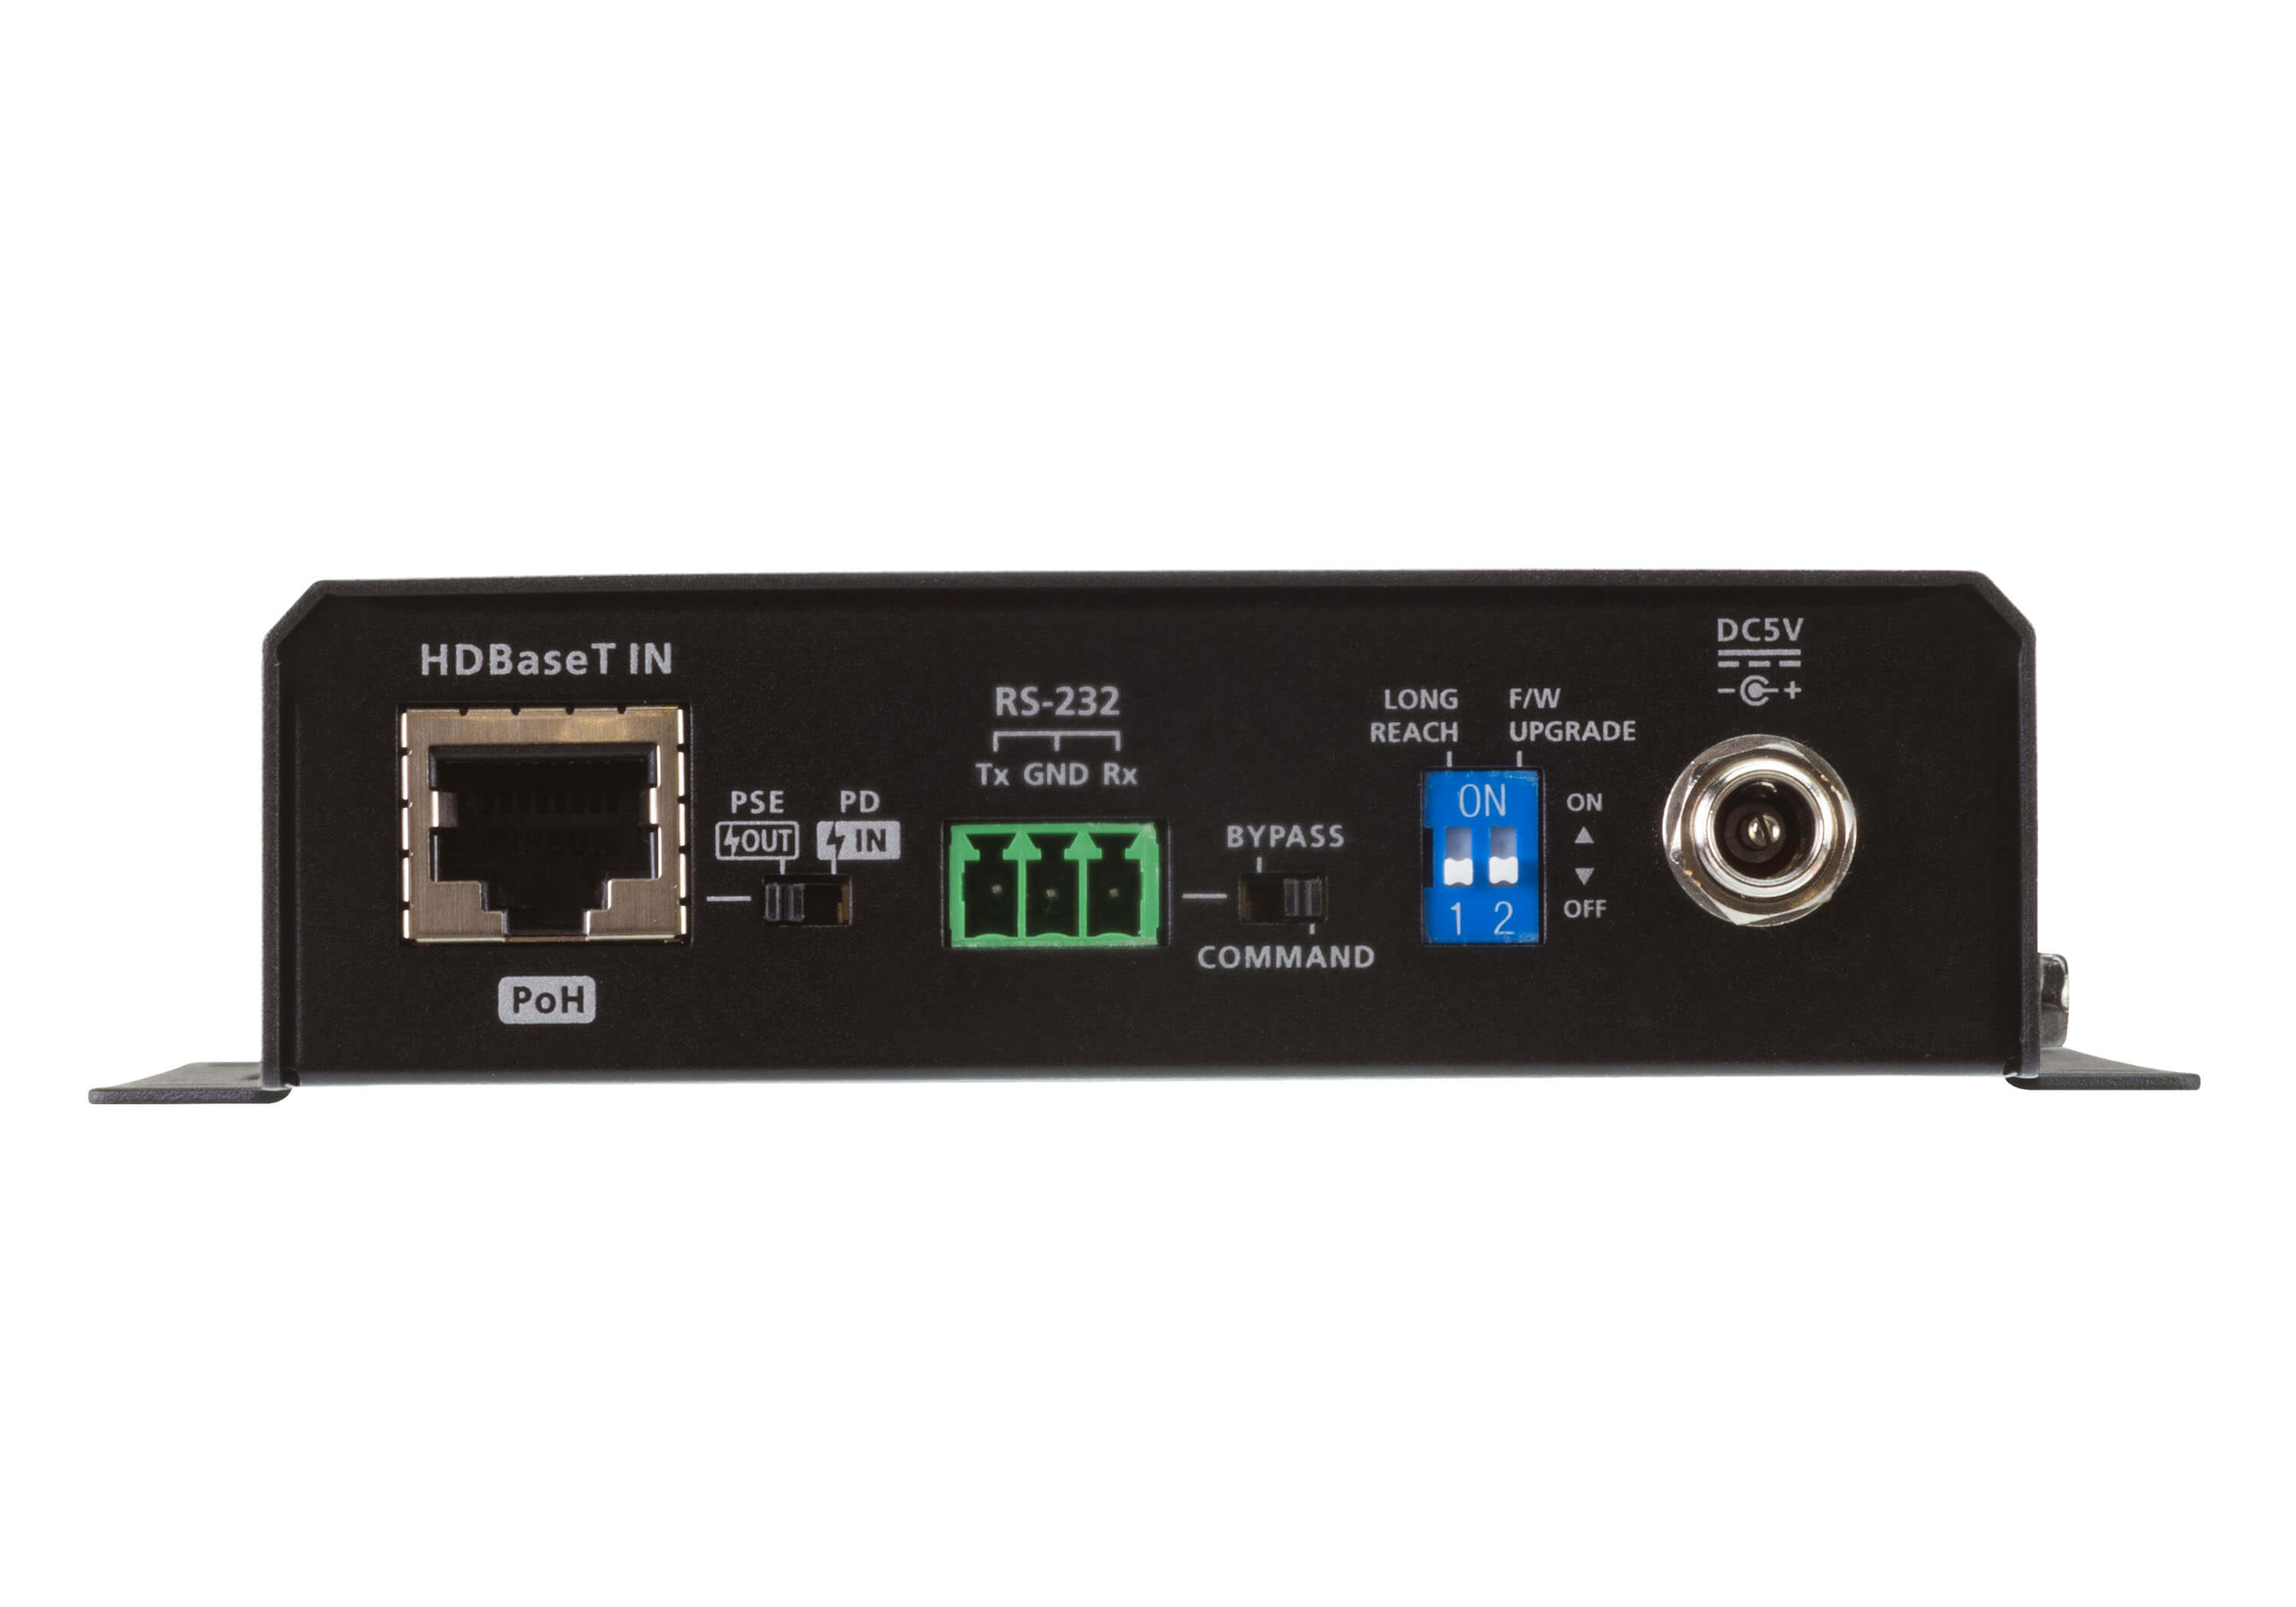 Aten HDMI HDBaseT Receiver with Audio De-Embedding / Bi-directional PoH (4K@100m) (HDBaseT Class A) (PoH PSE & PD) -VE2812PR (1 Year Manufacture Local Warranty In Singapore)